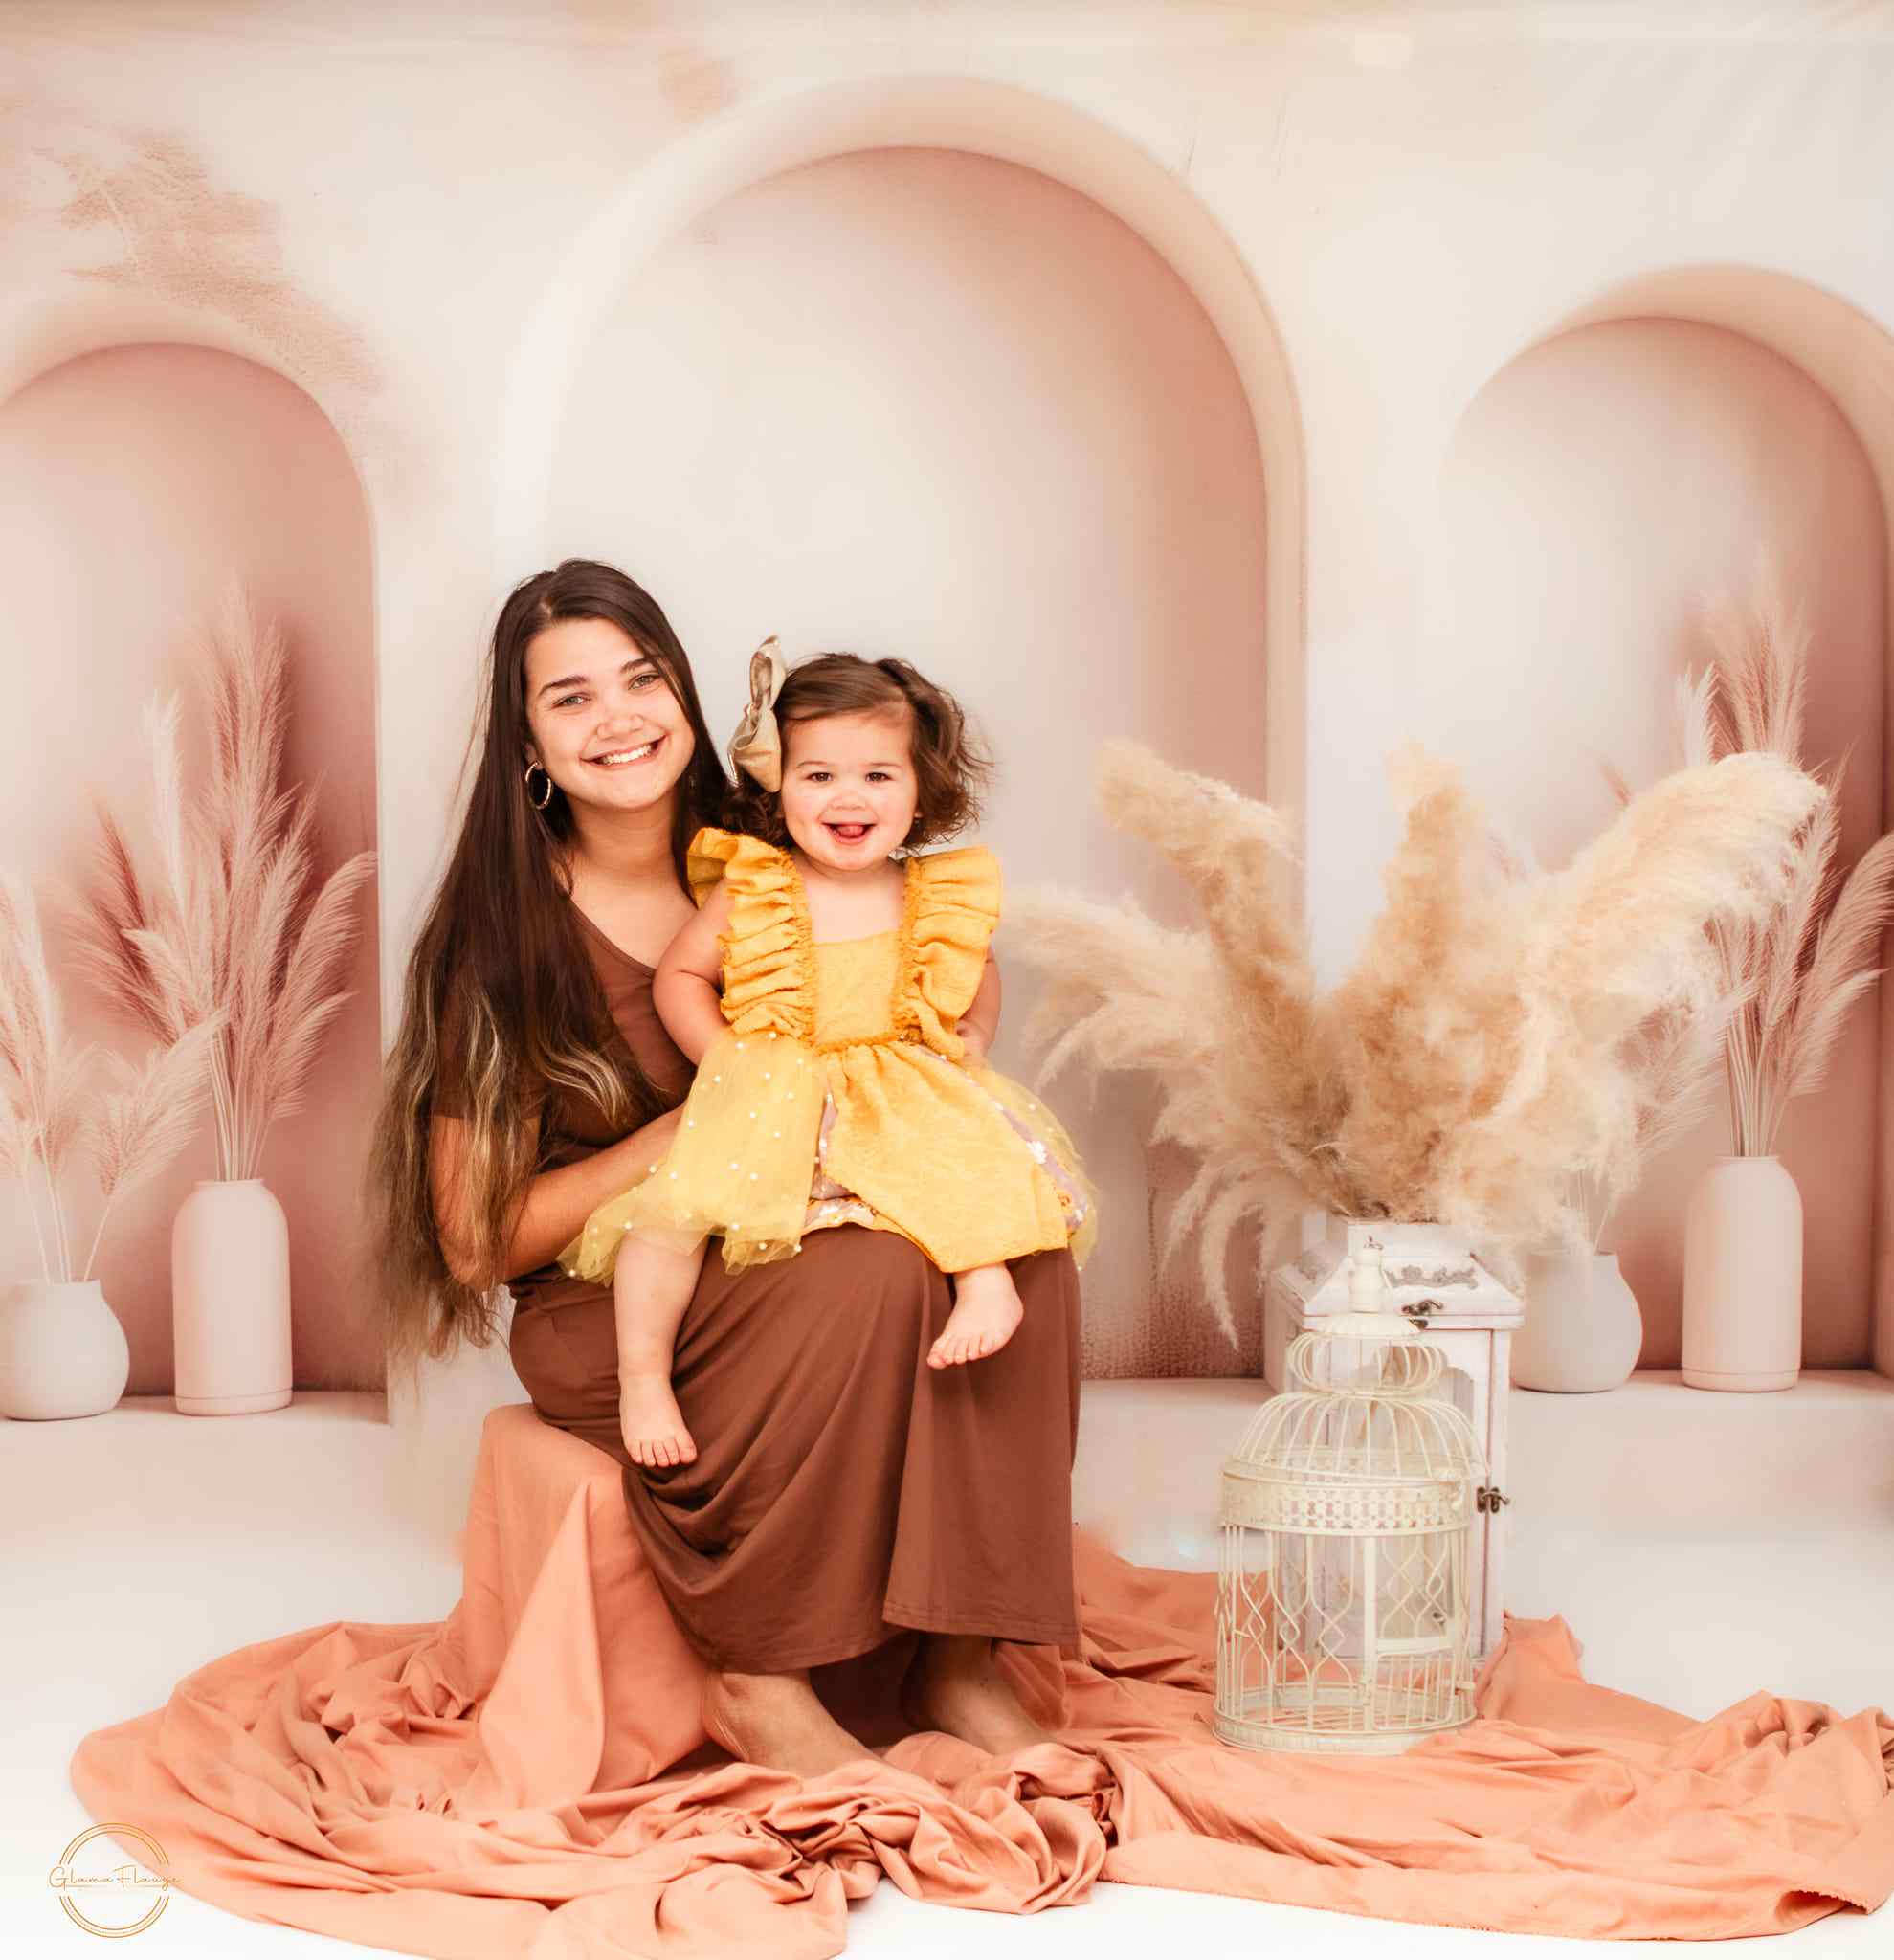 Mom holding daughter in front of beige arched wall Backdrop